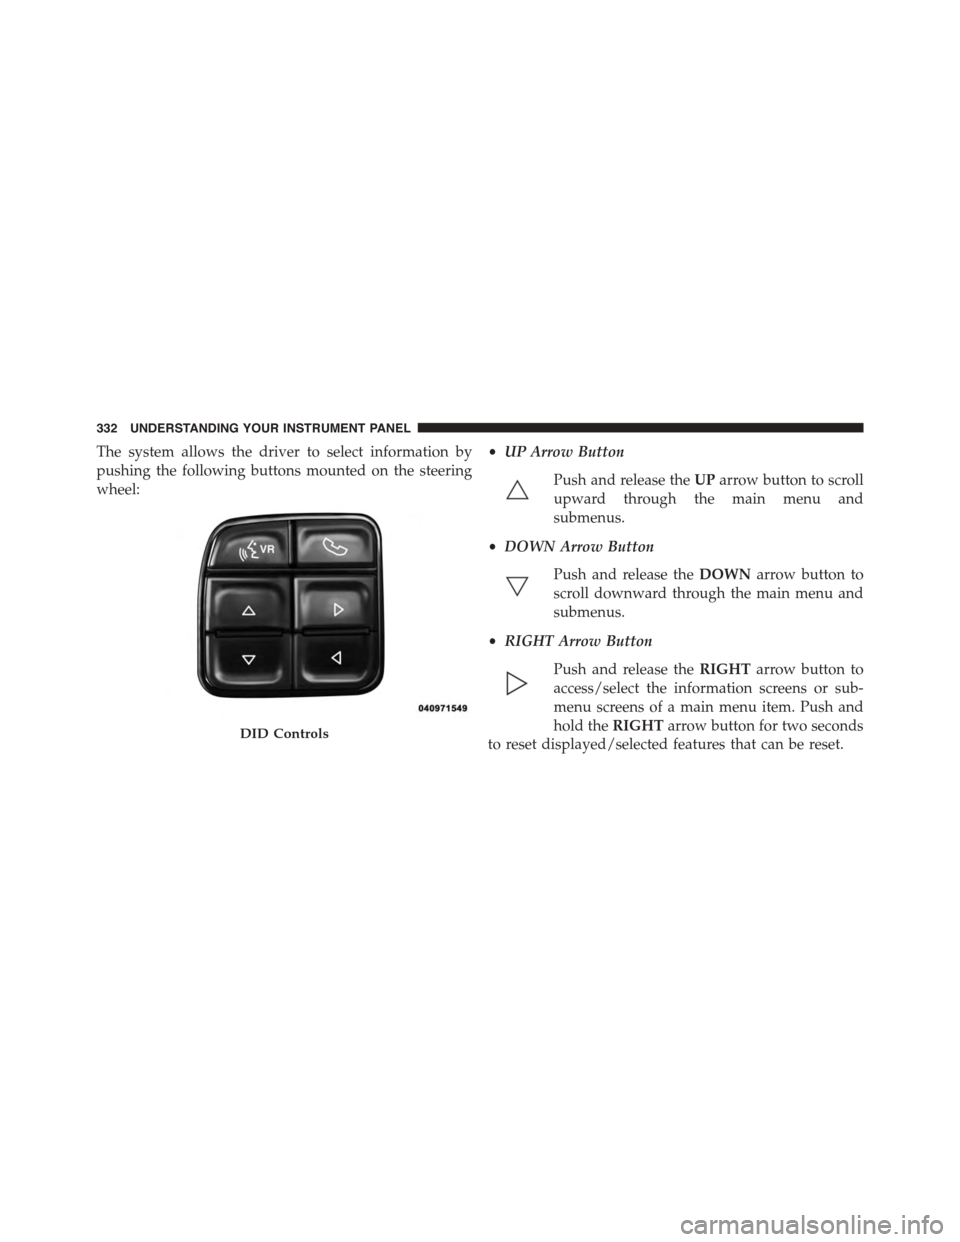 Ram 1500 2015 Owners Guide The system allows the driver to select information by
pushing the following buttons mounted on the steering
wheel:
•UP Arrow Button
Push and release theUParrow button to scroll
upward through the ma